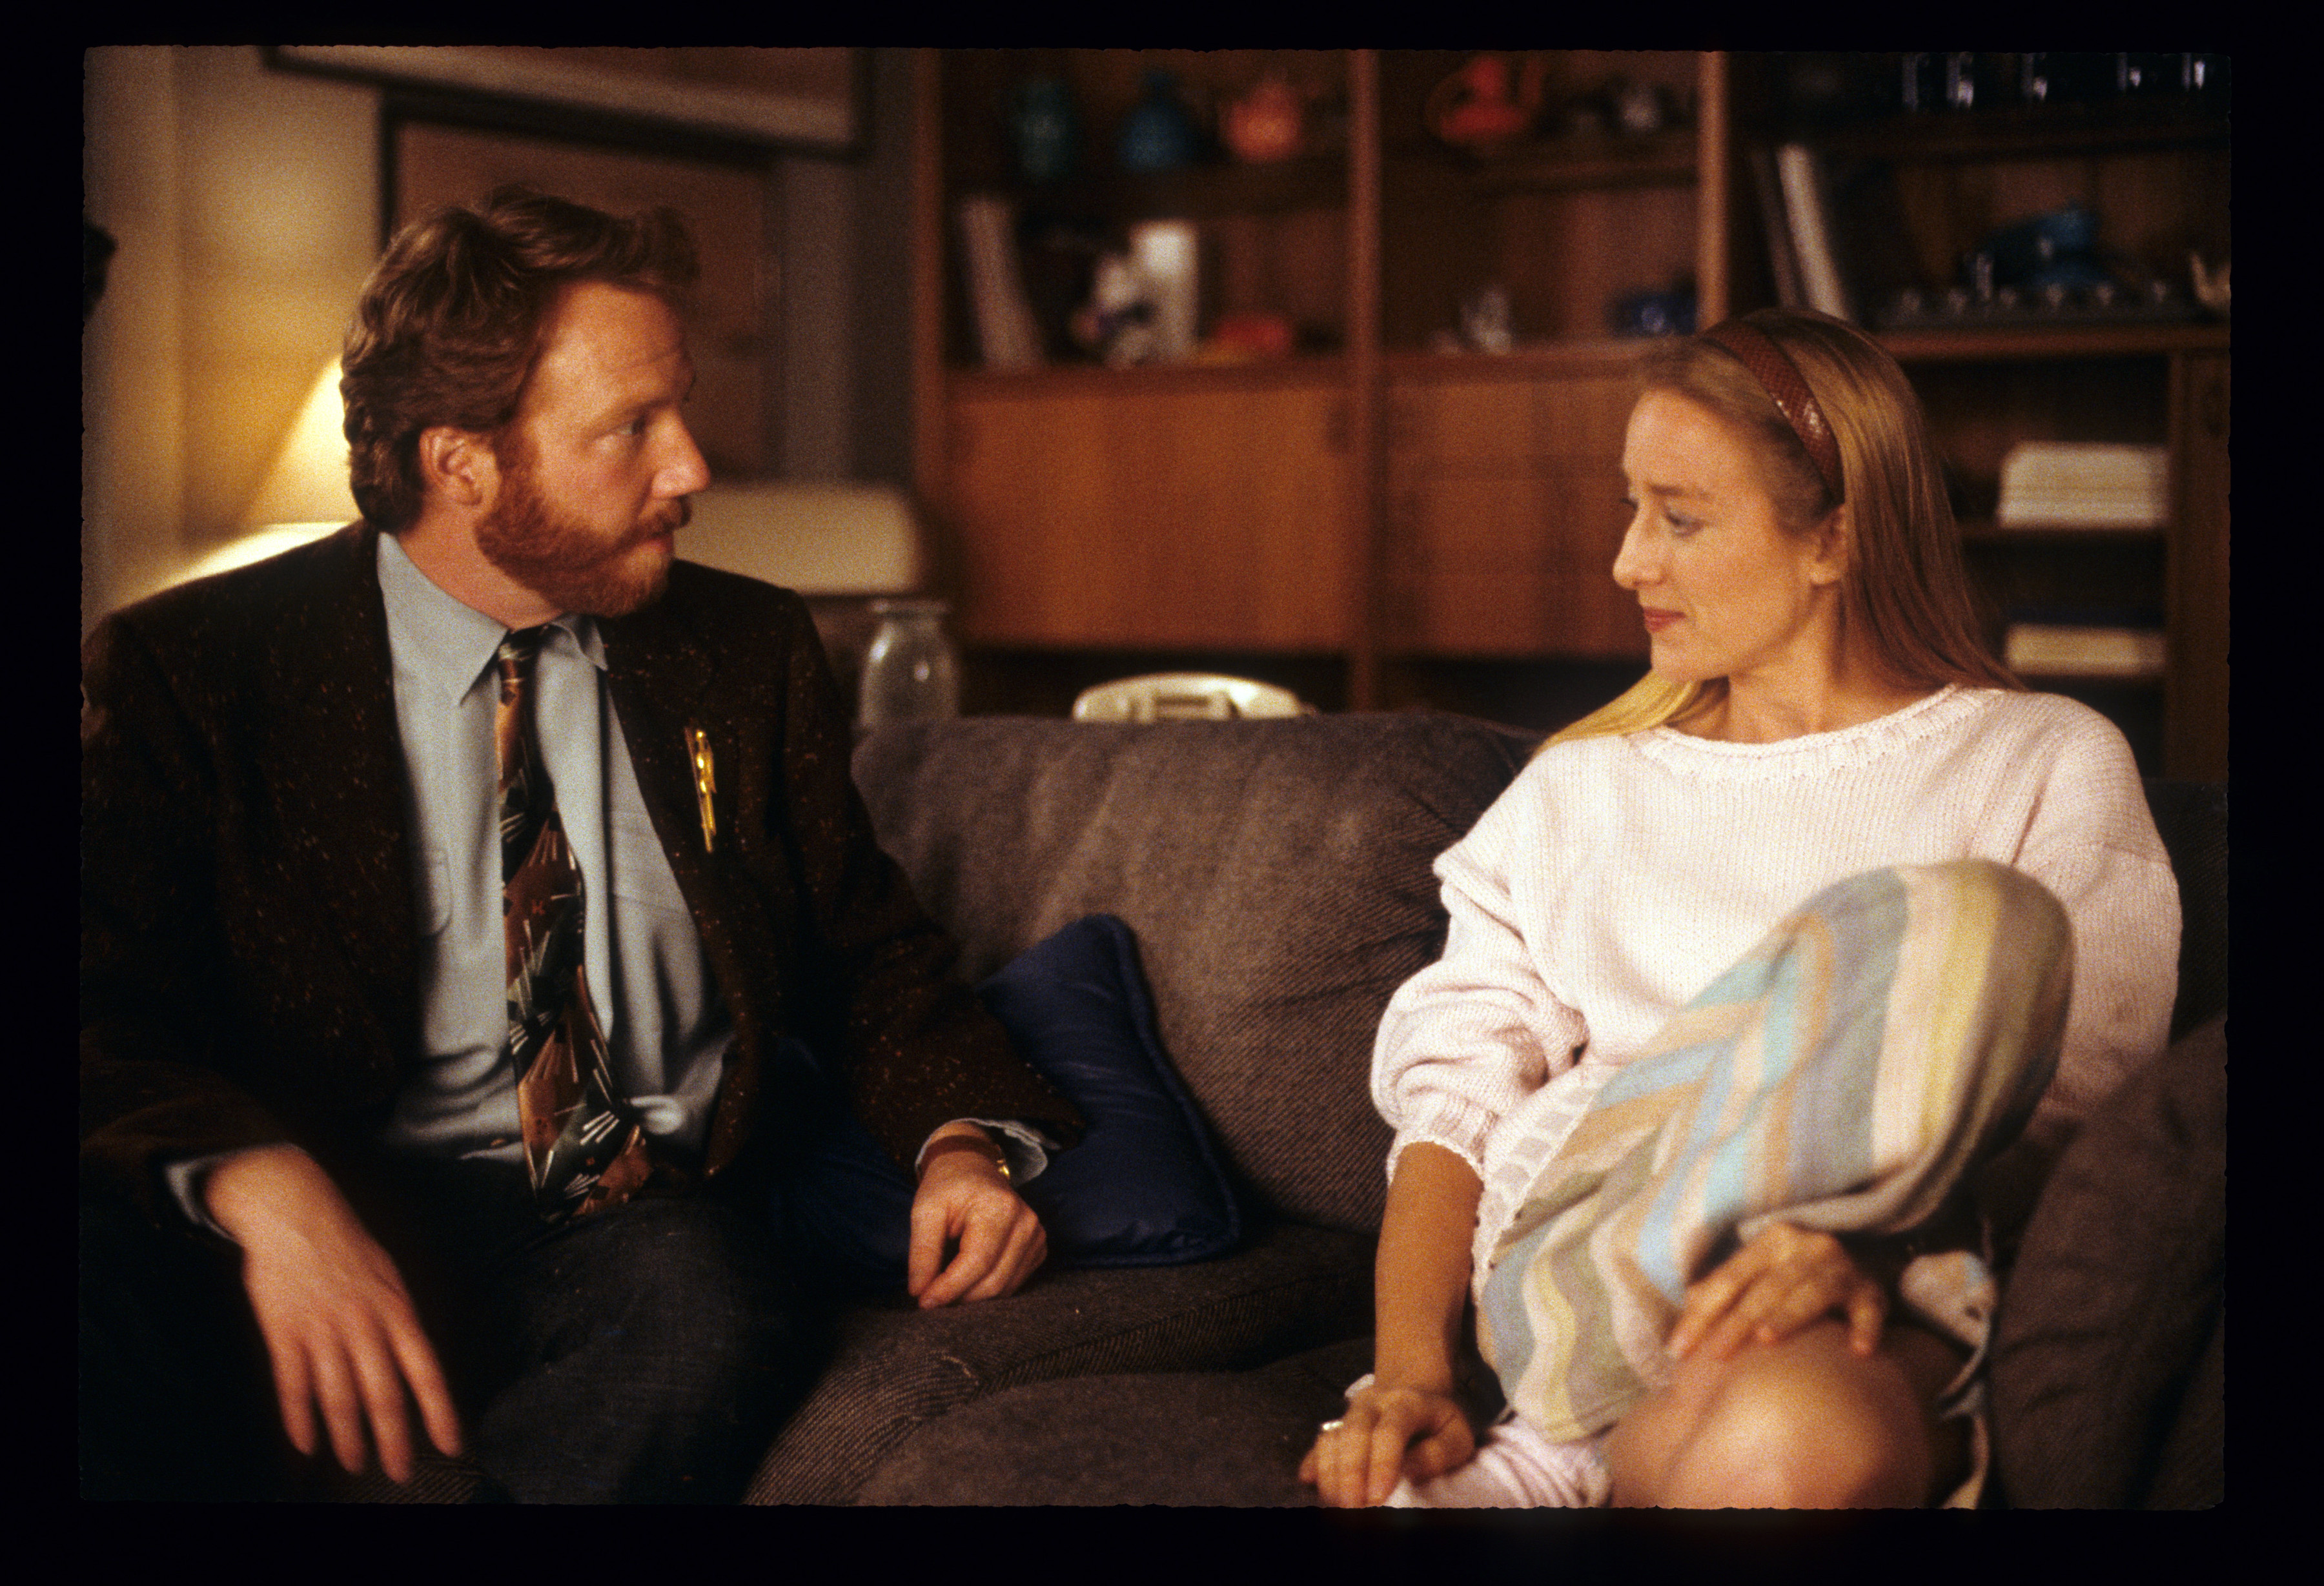 Timothy Busfield and Patricia Wettig of 'Thirtysomething'